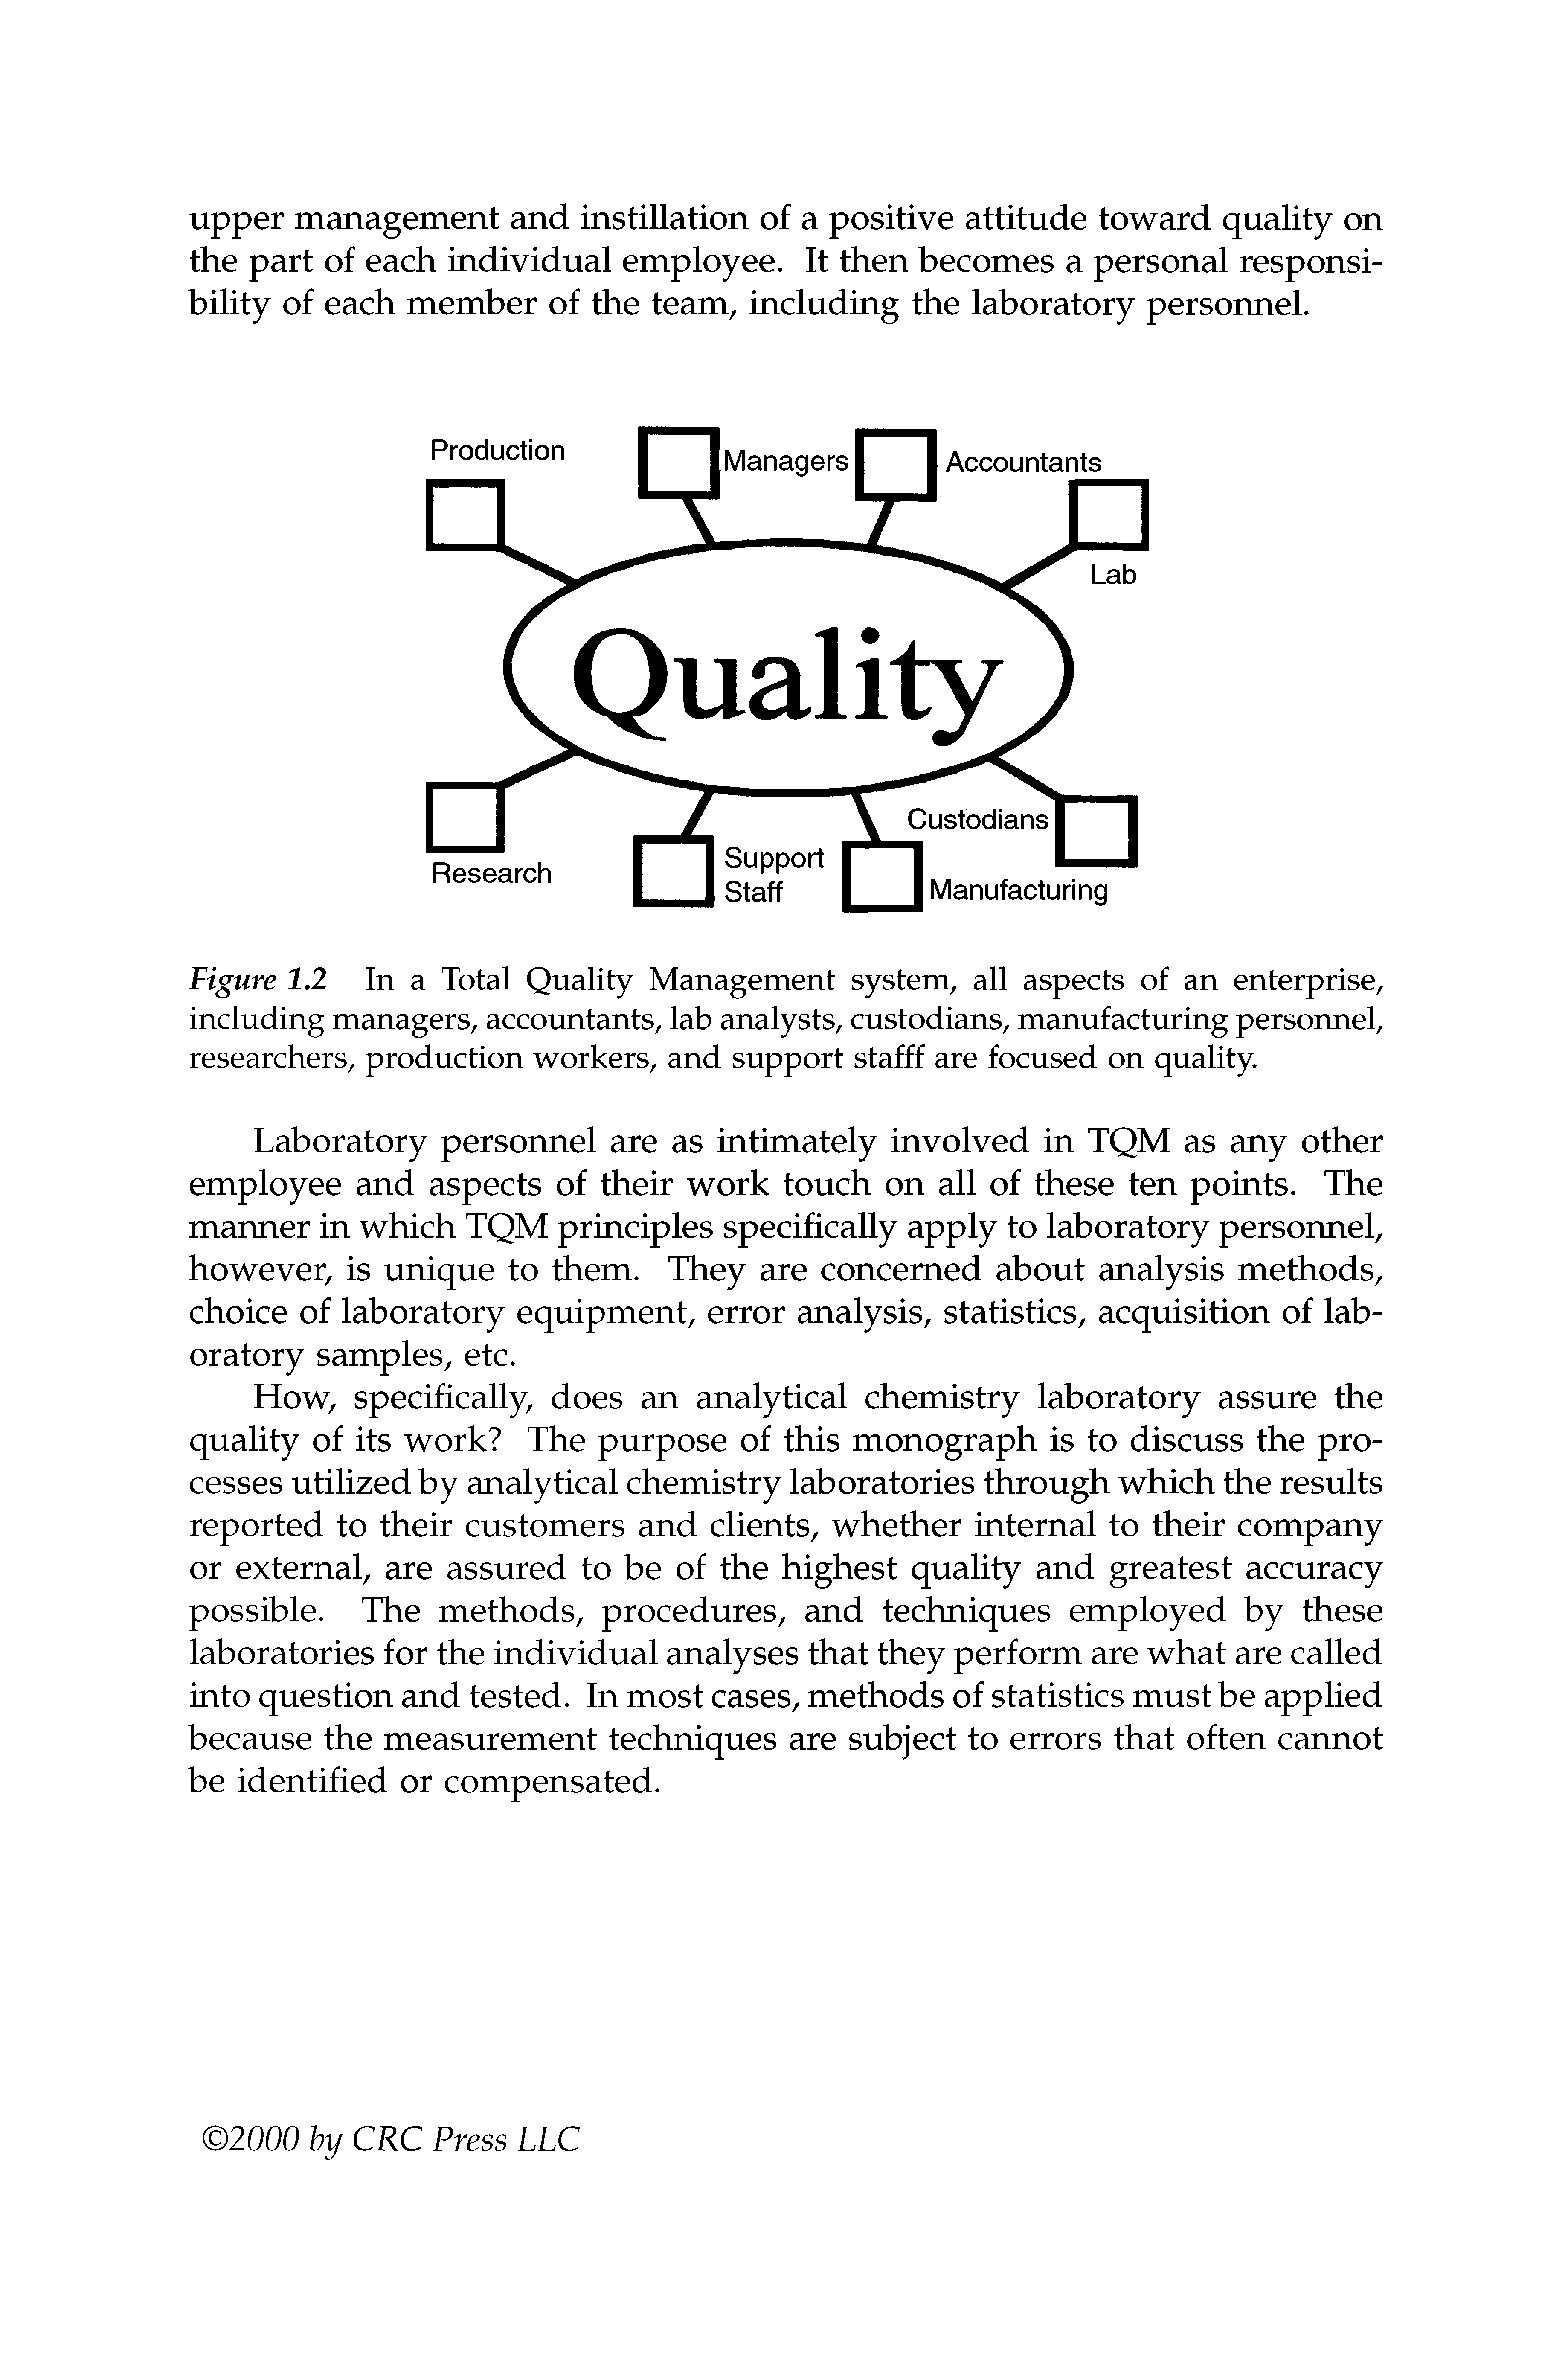 Figure 1.2 In a Total Quality Management system, all aspects of an enterprise, including managers, accountants, lab analysts, custodians, manufacturing personnel, researchers, production workers, and support stafff are focused on quality...